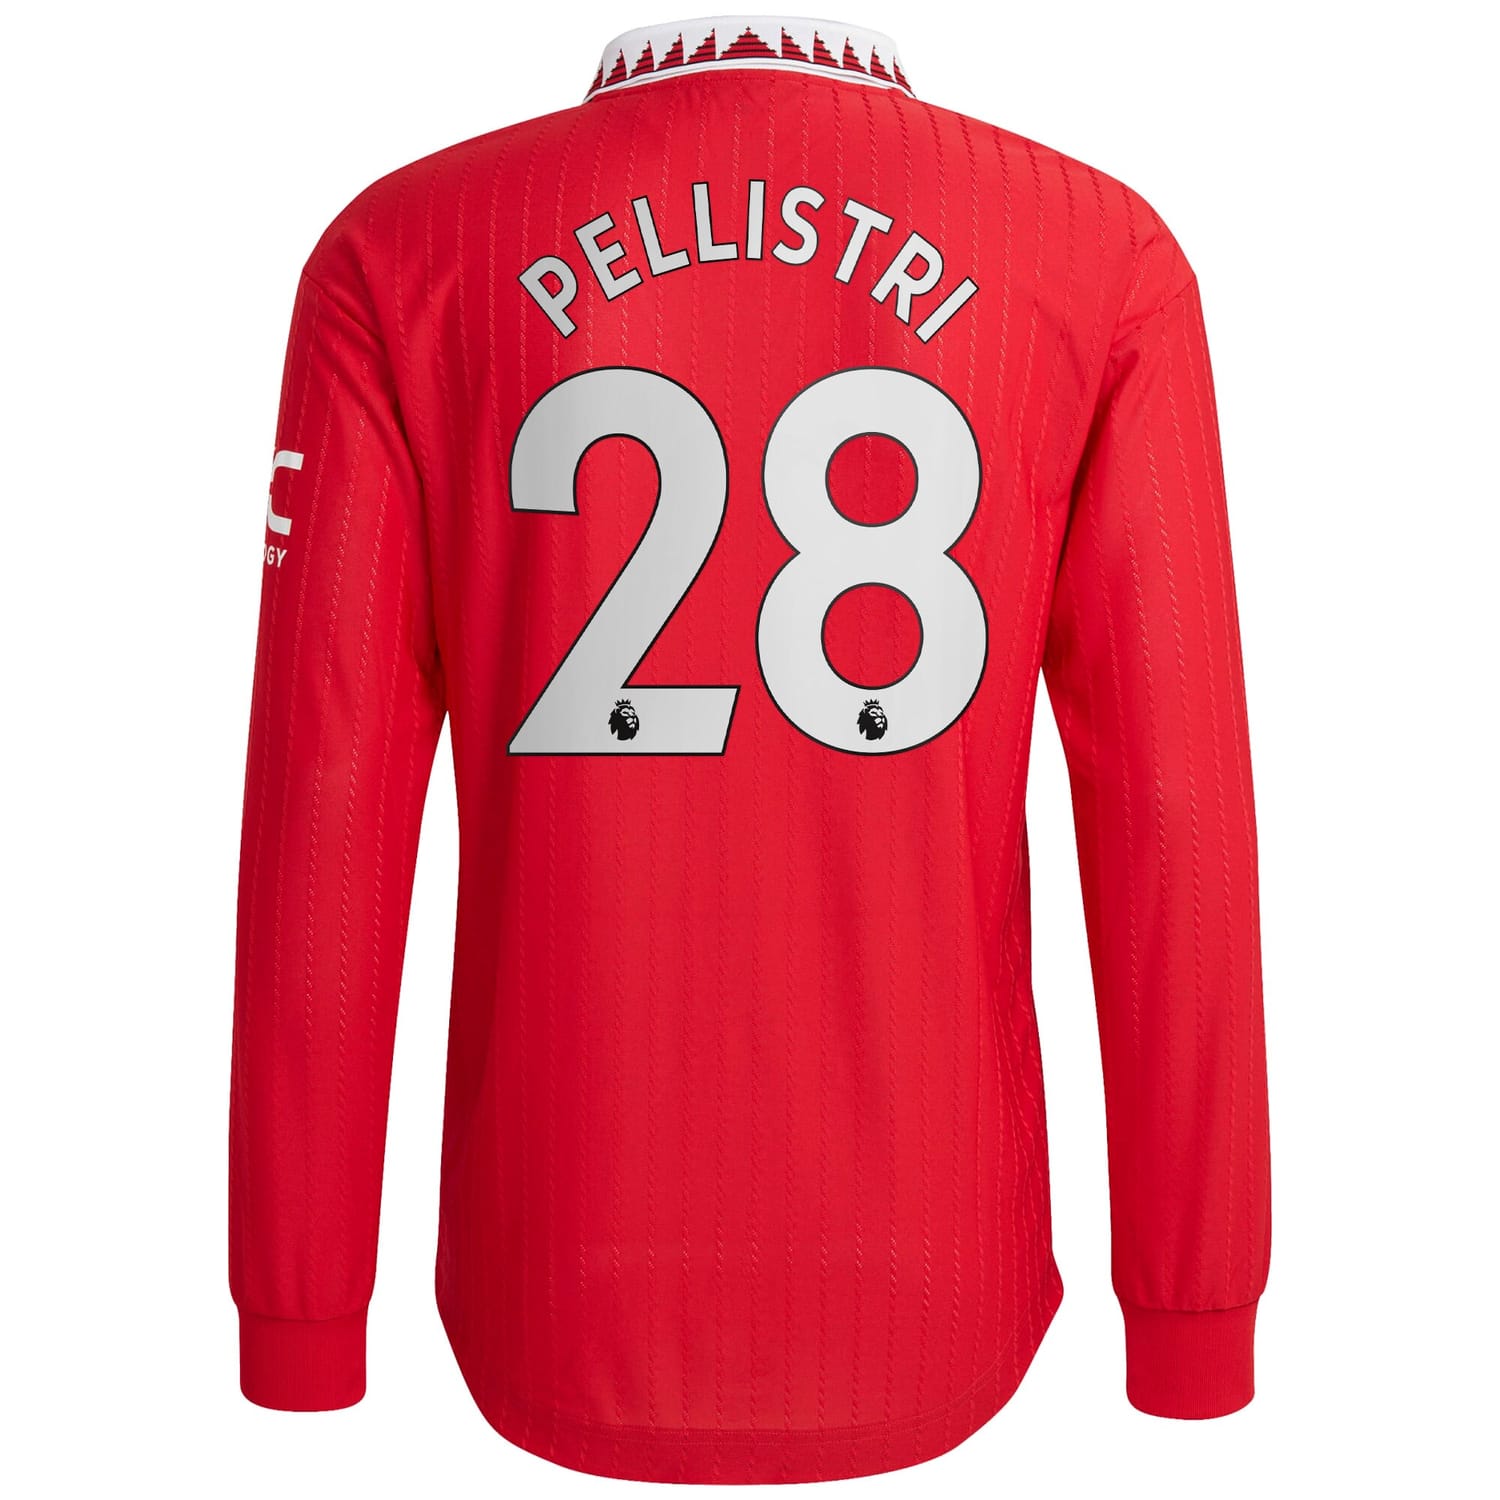 Premier League Manchester United Home Authentic Jersey Shirt Long Sleeve 2022-23 player Facundo Pellistri 28 printing for Men